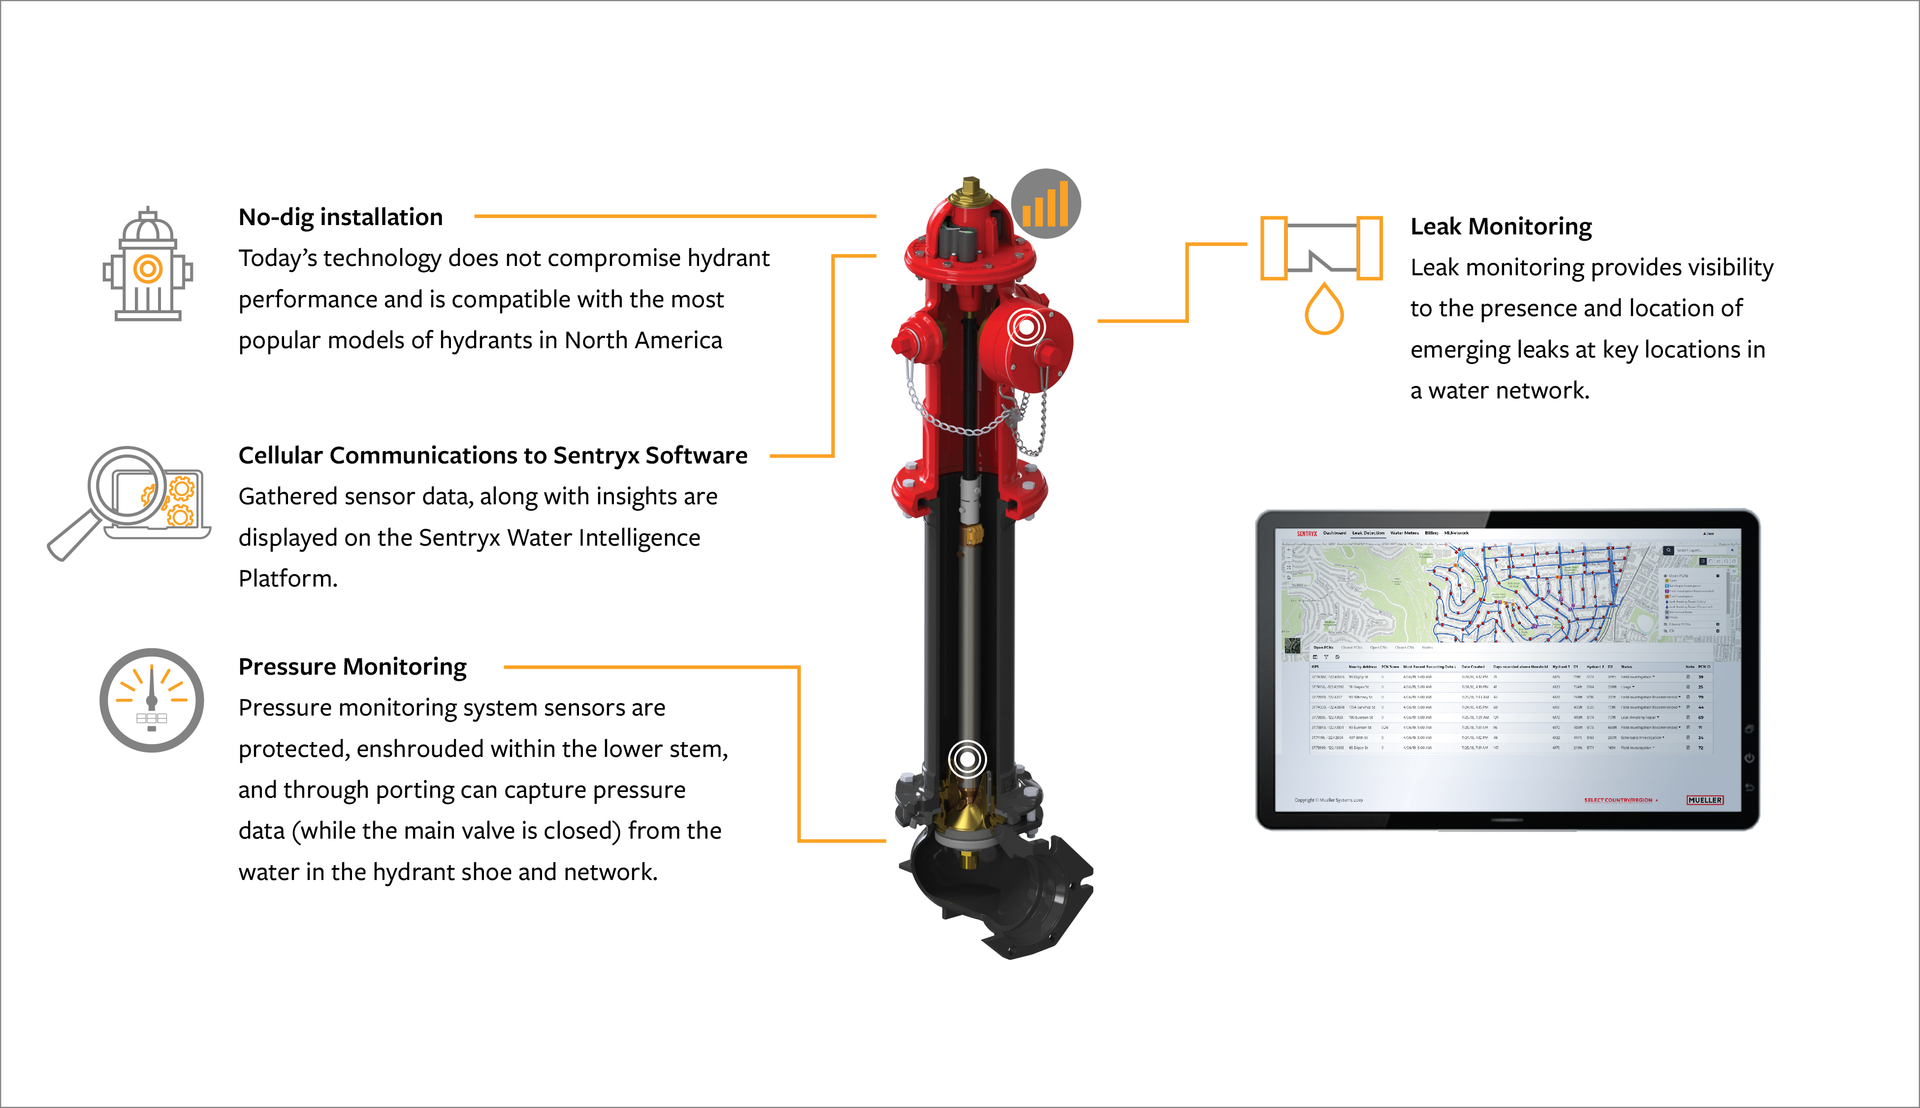 Even fire hydrants are turning into communication hubs, acting as a gateway for remote pressure monitoring and leak detection.